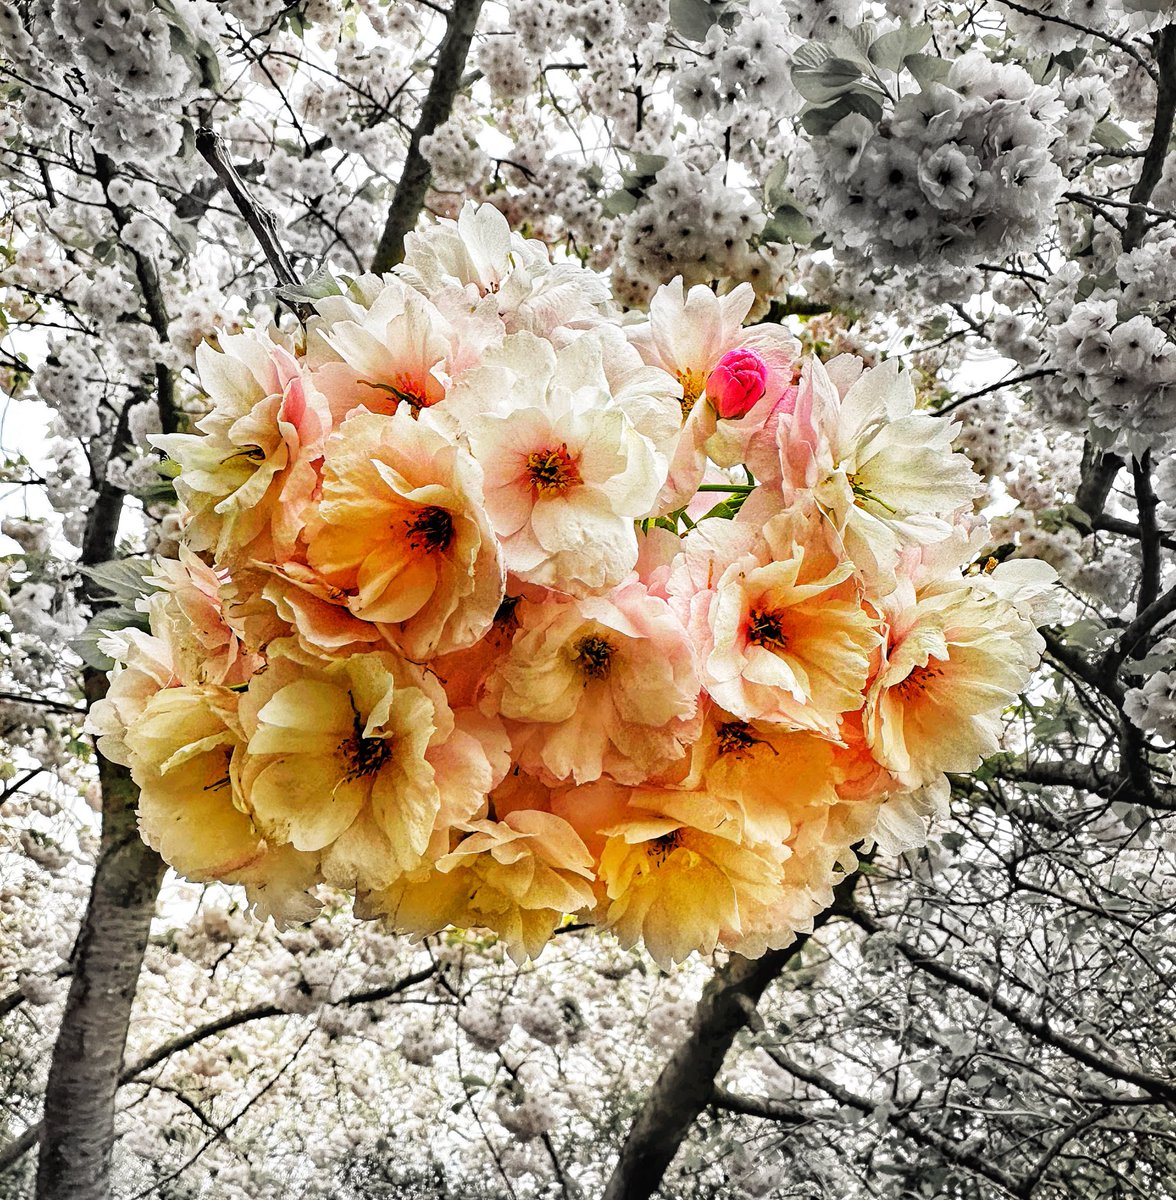 Spring is springing! 🌸❤️🌸 #nature #natureconnection #blossom #sakura #trees @keeper_of_books @SAKURAProject @theblossomtree @Lovly_Nature